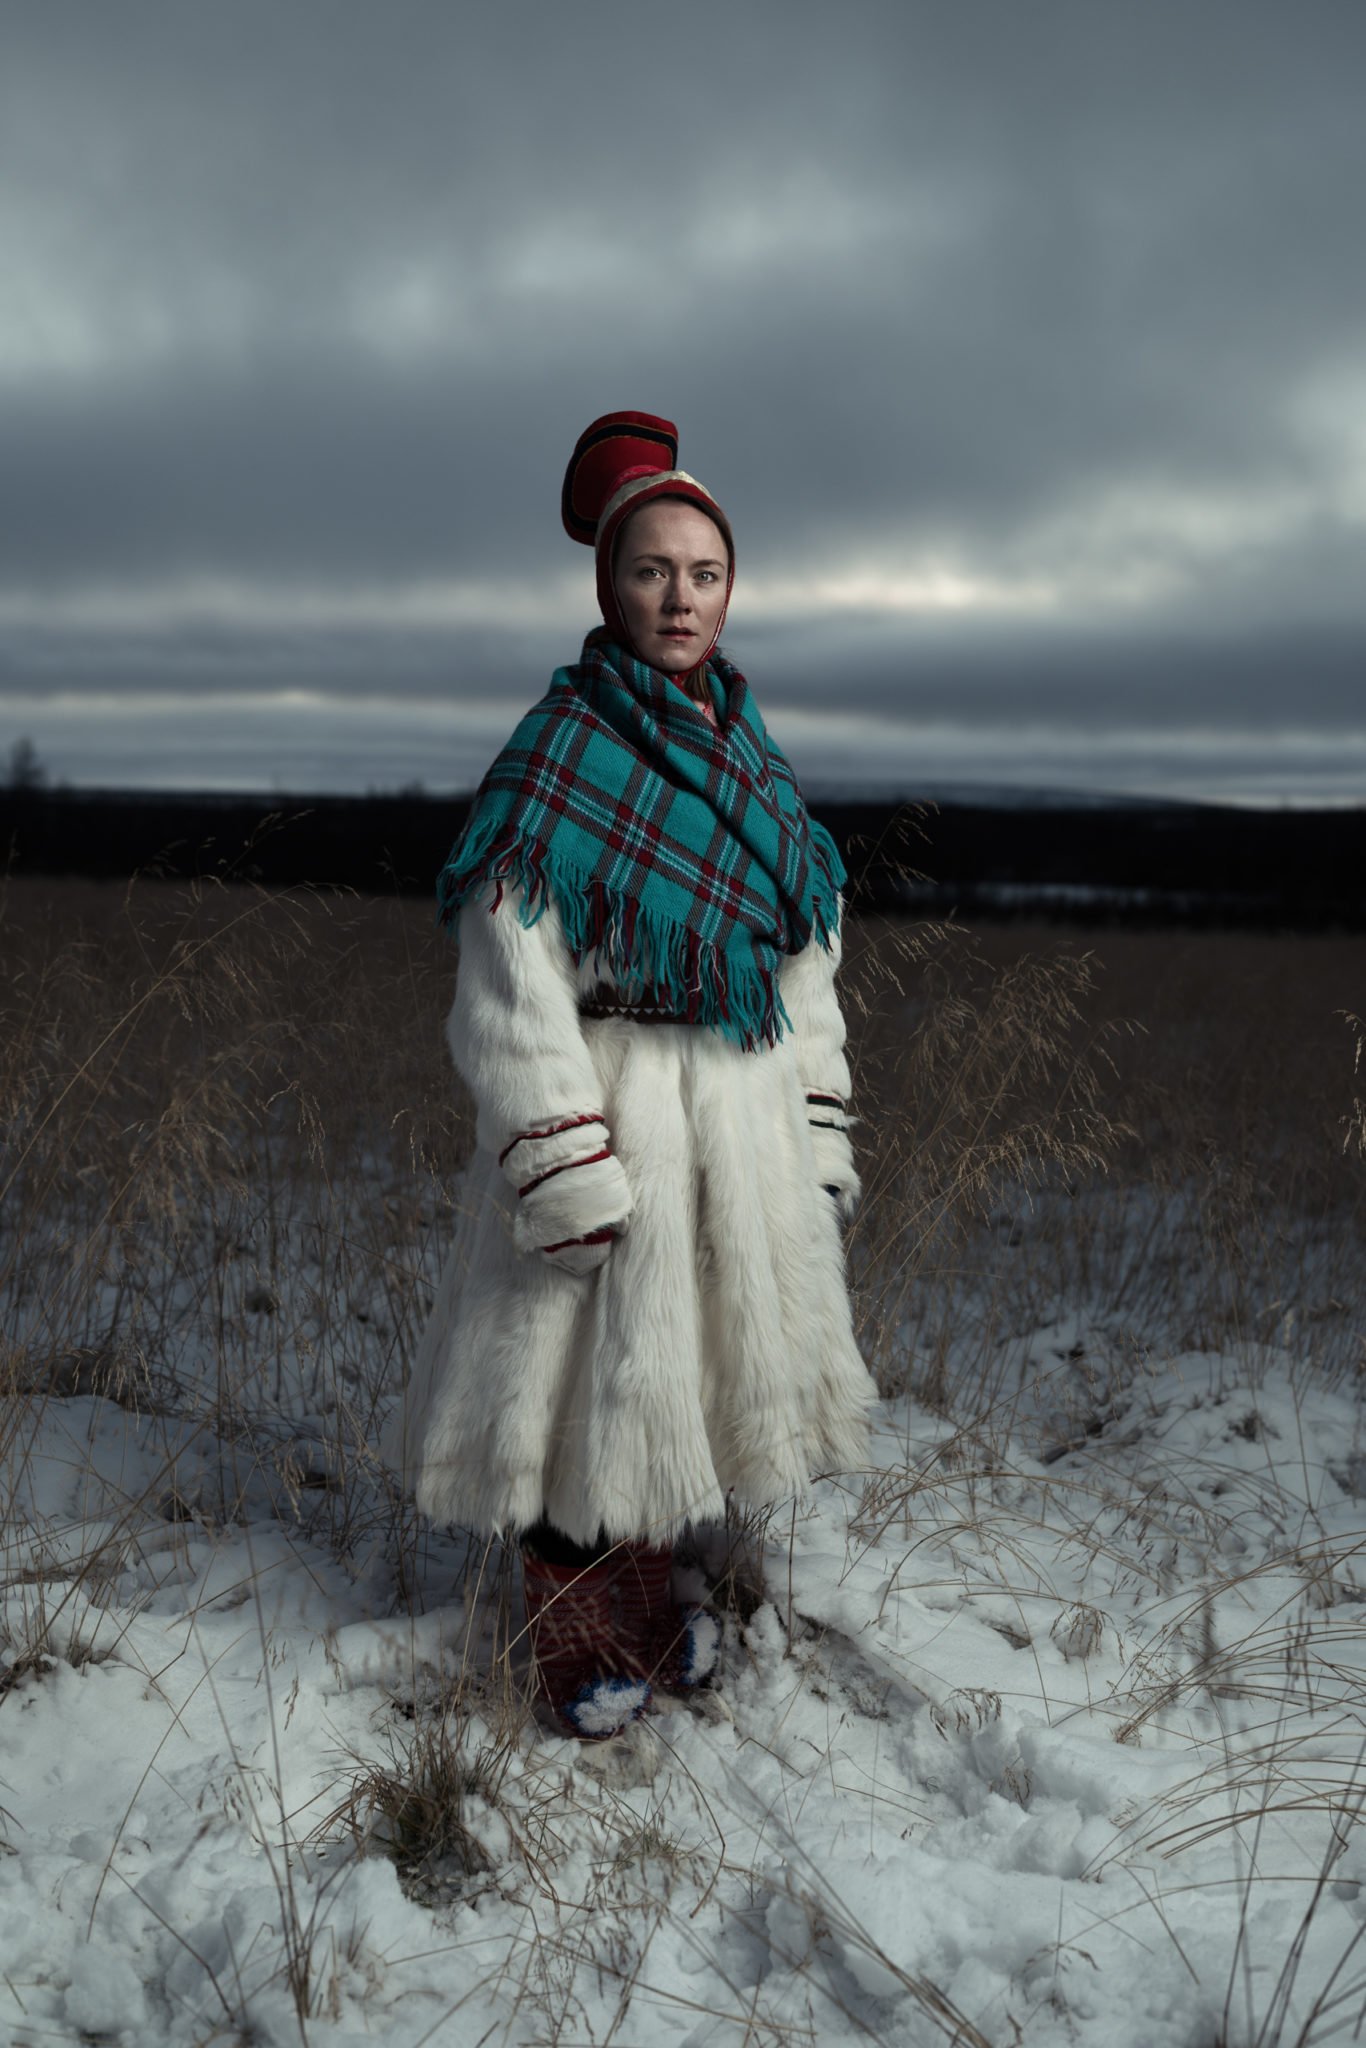 Jarle Hagan's Documentary Style Portraits of the Sami People of Norway